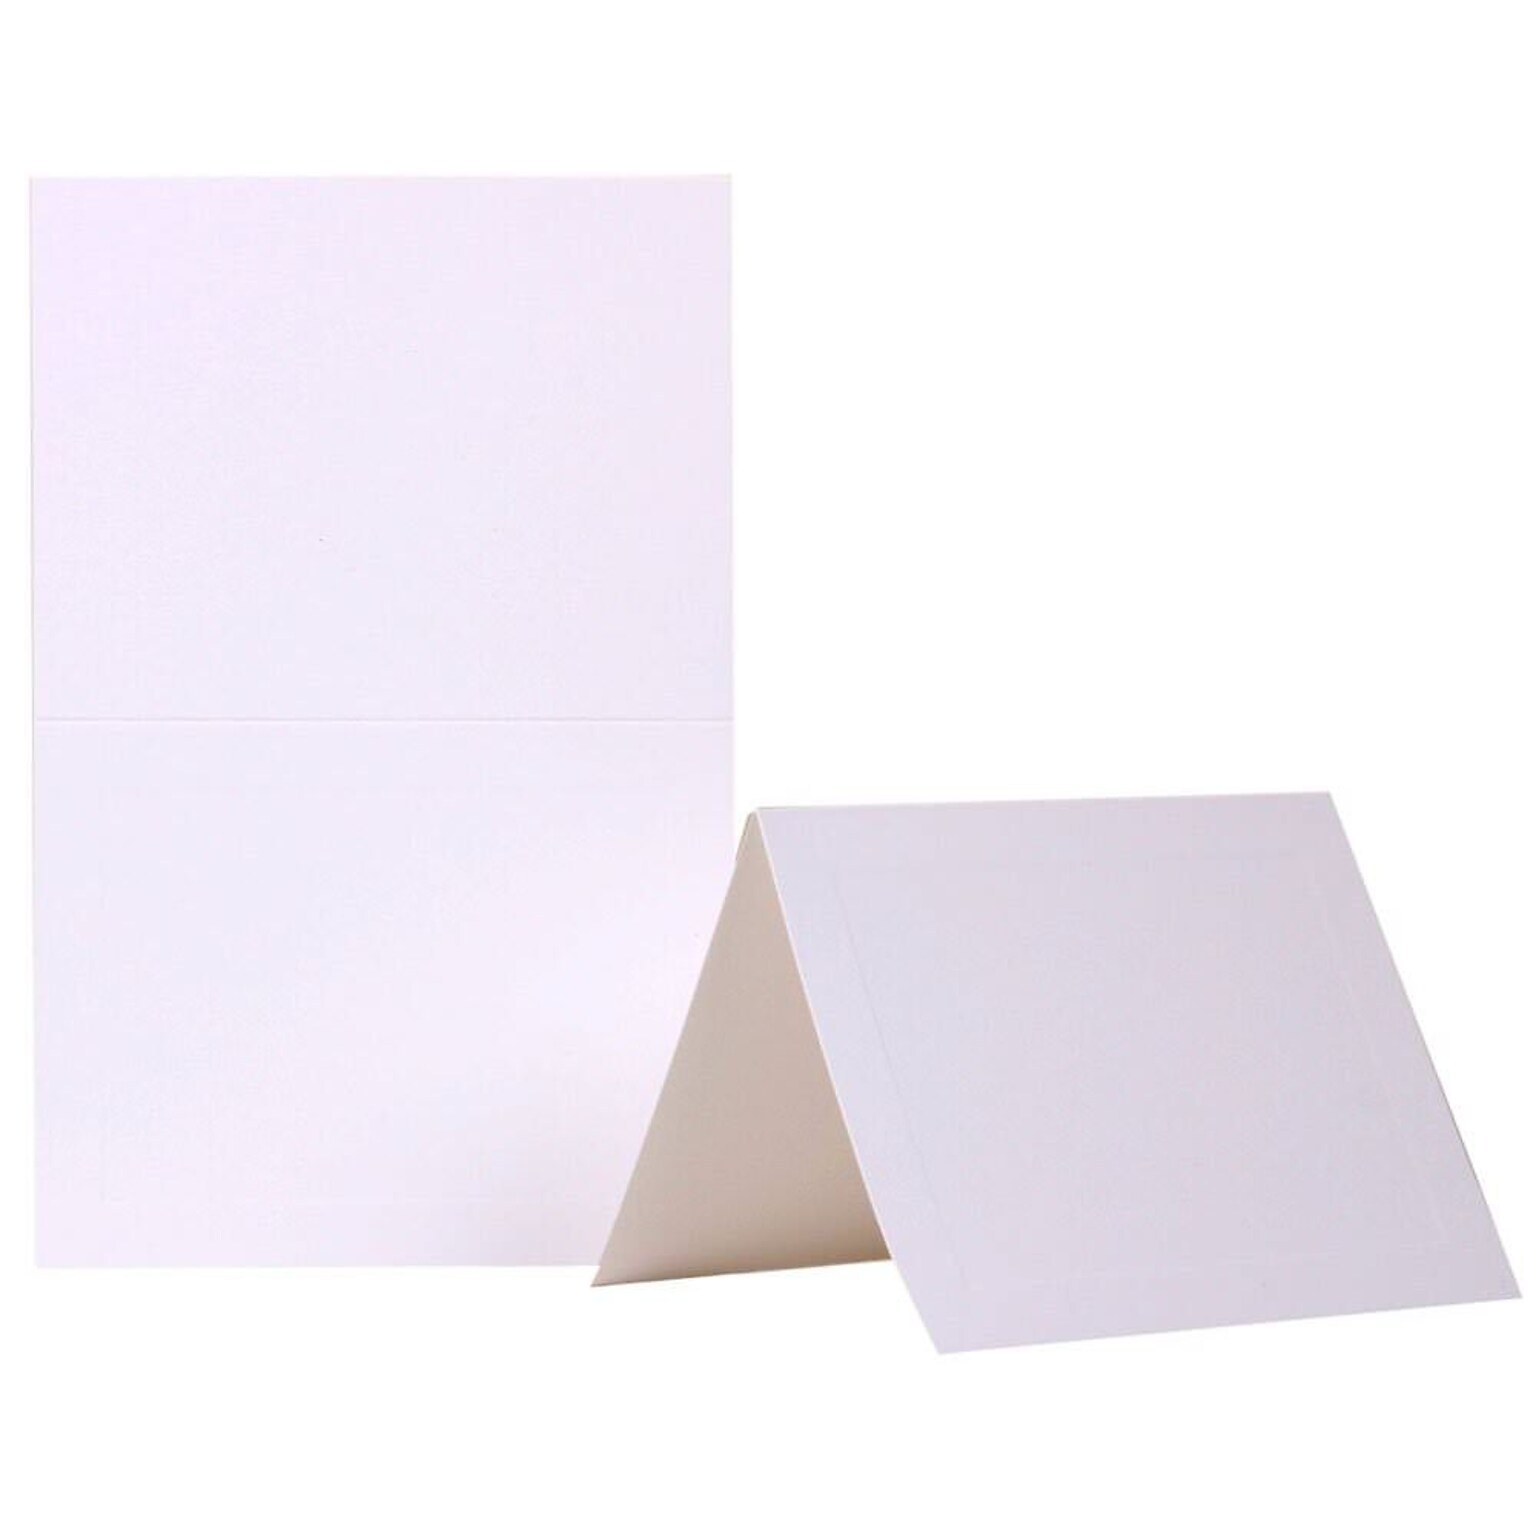 JAM Paper® Fold over Cards, A2 size, 4 3/8 x 5 7/16, White Panel, 25/pack (309915f)